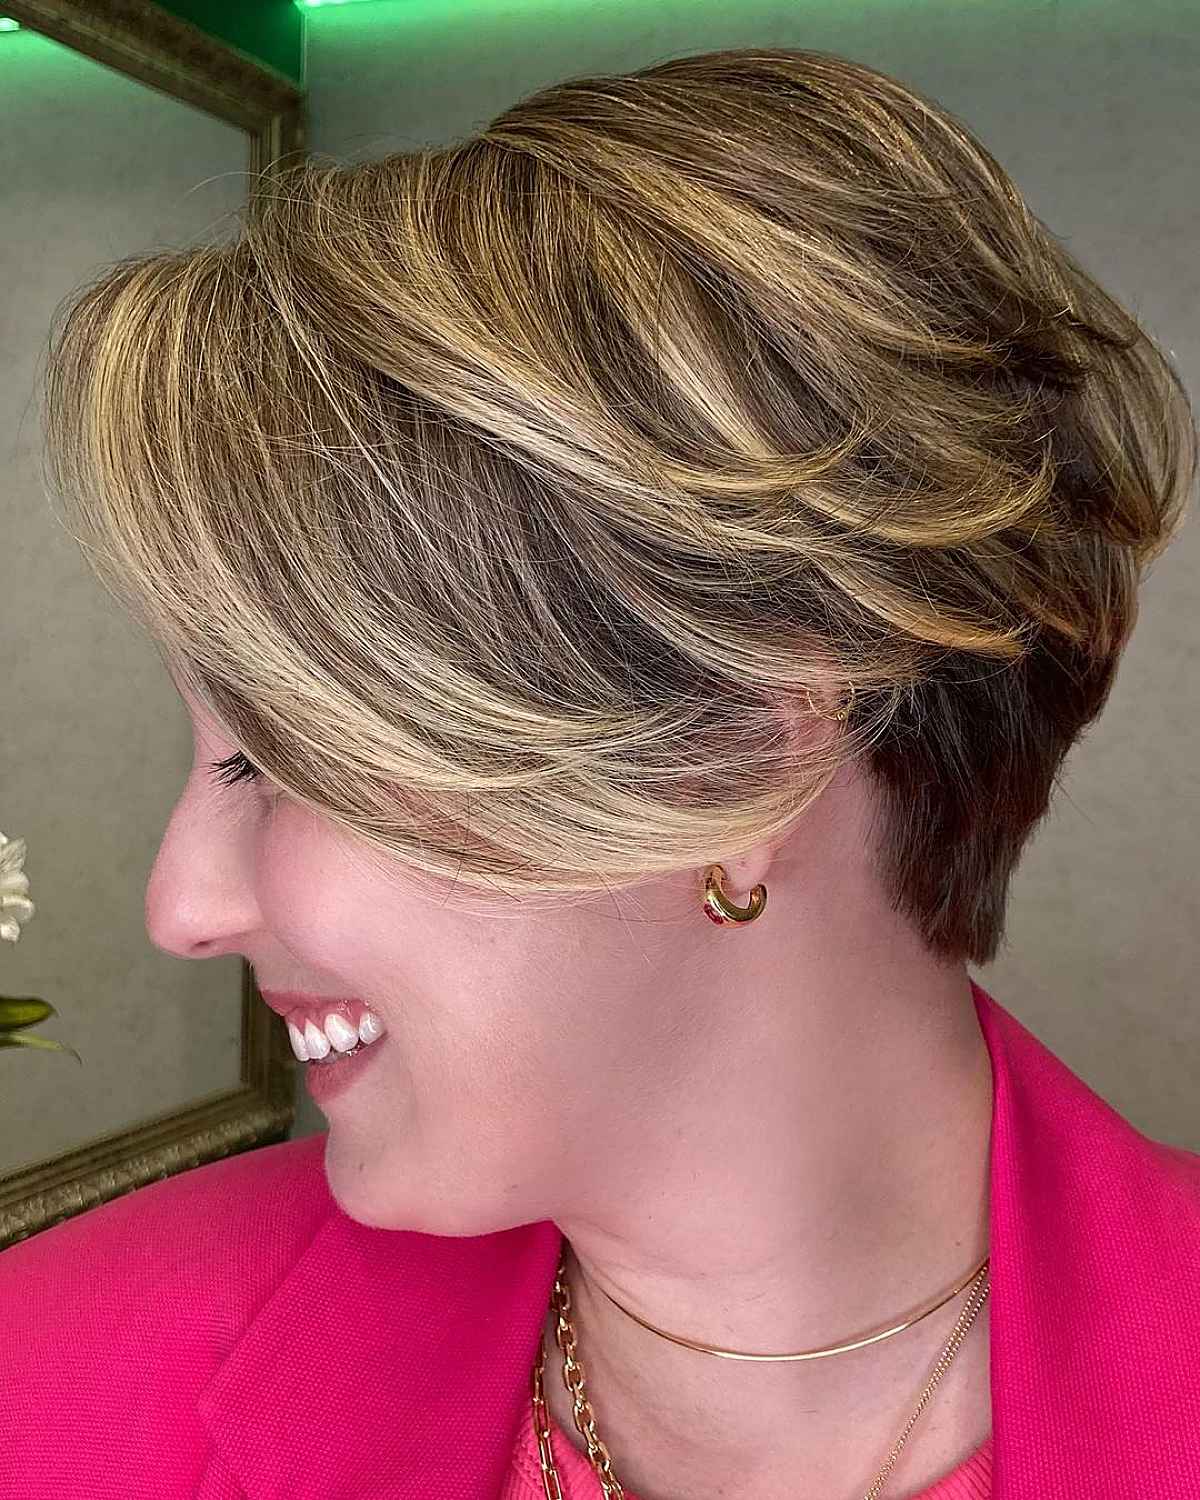 a feathered pixie bob with balayage highlights looks modern and fresh but will require manintenance and a blow dry